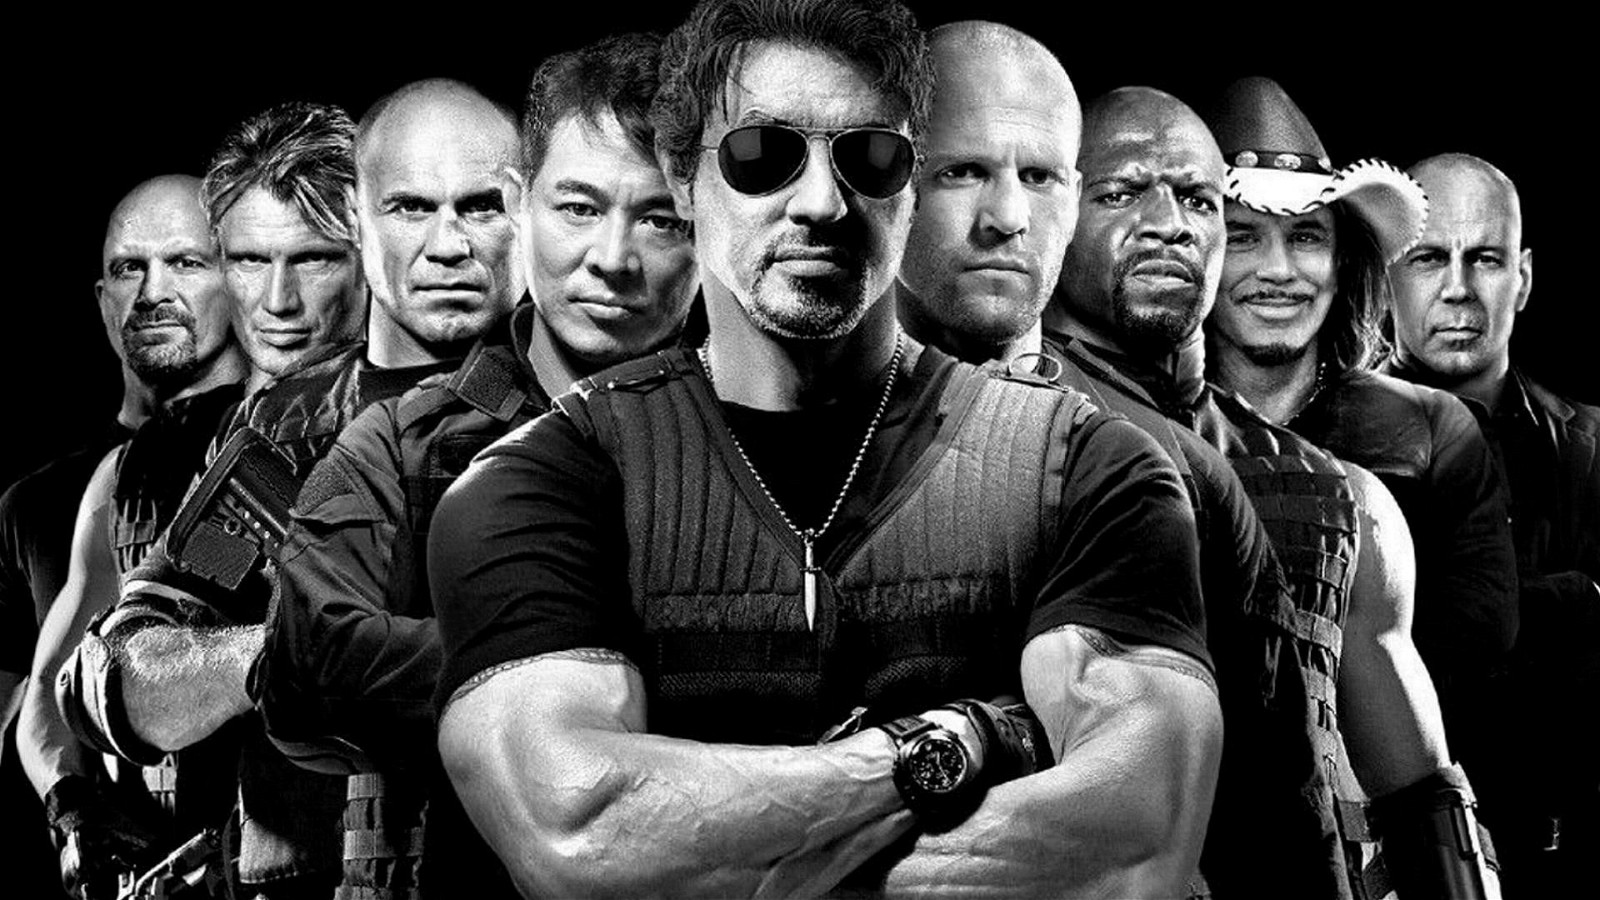 Cast of The Expendables